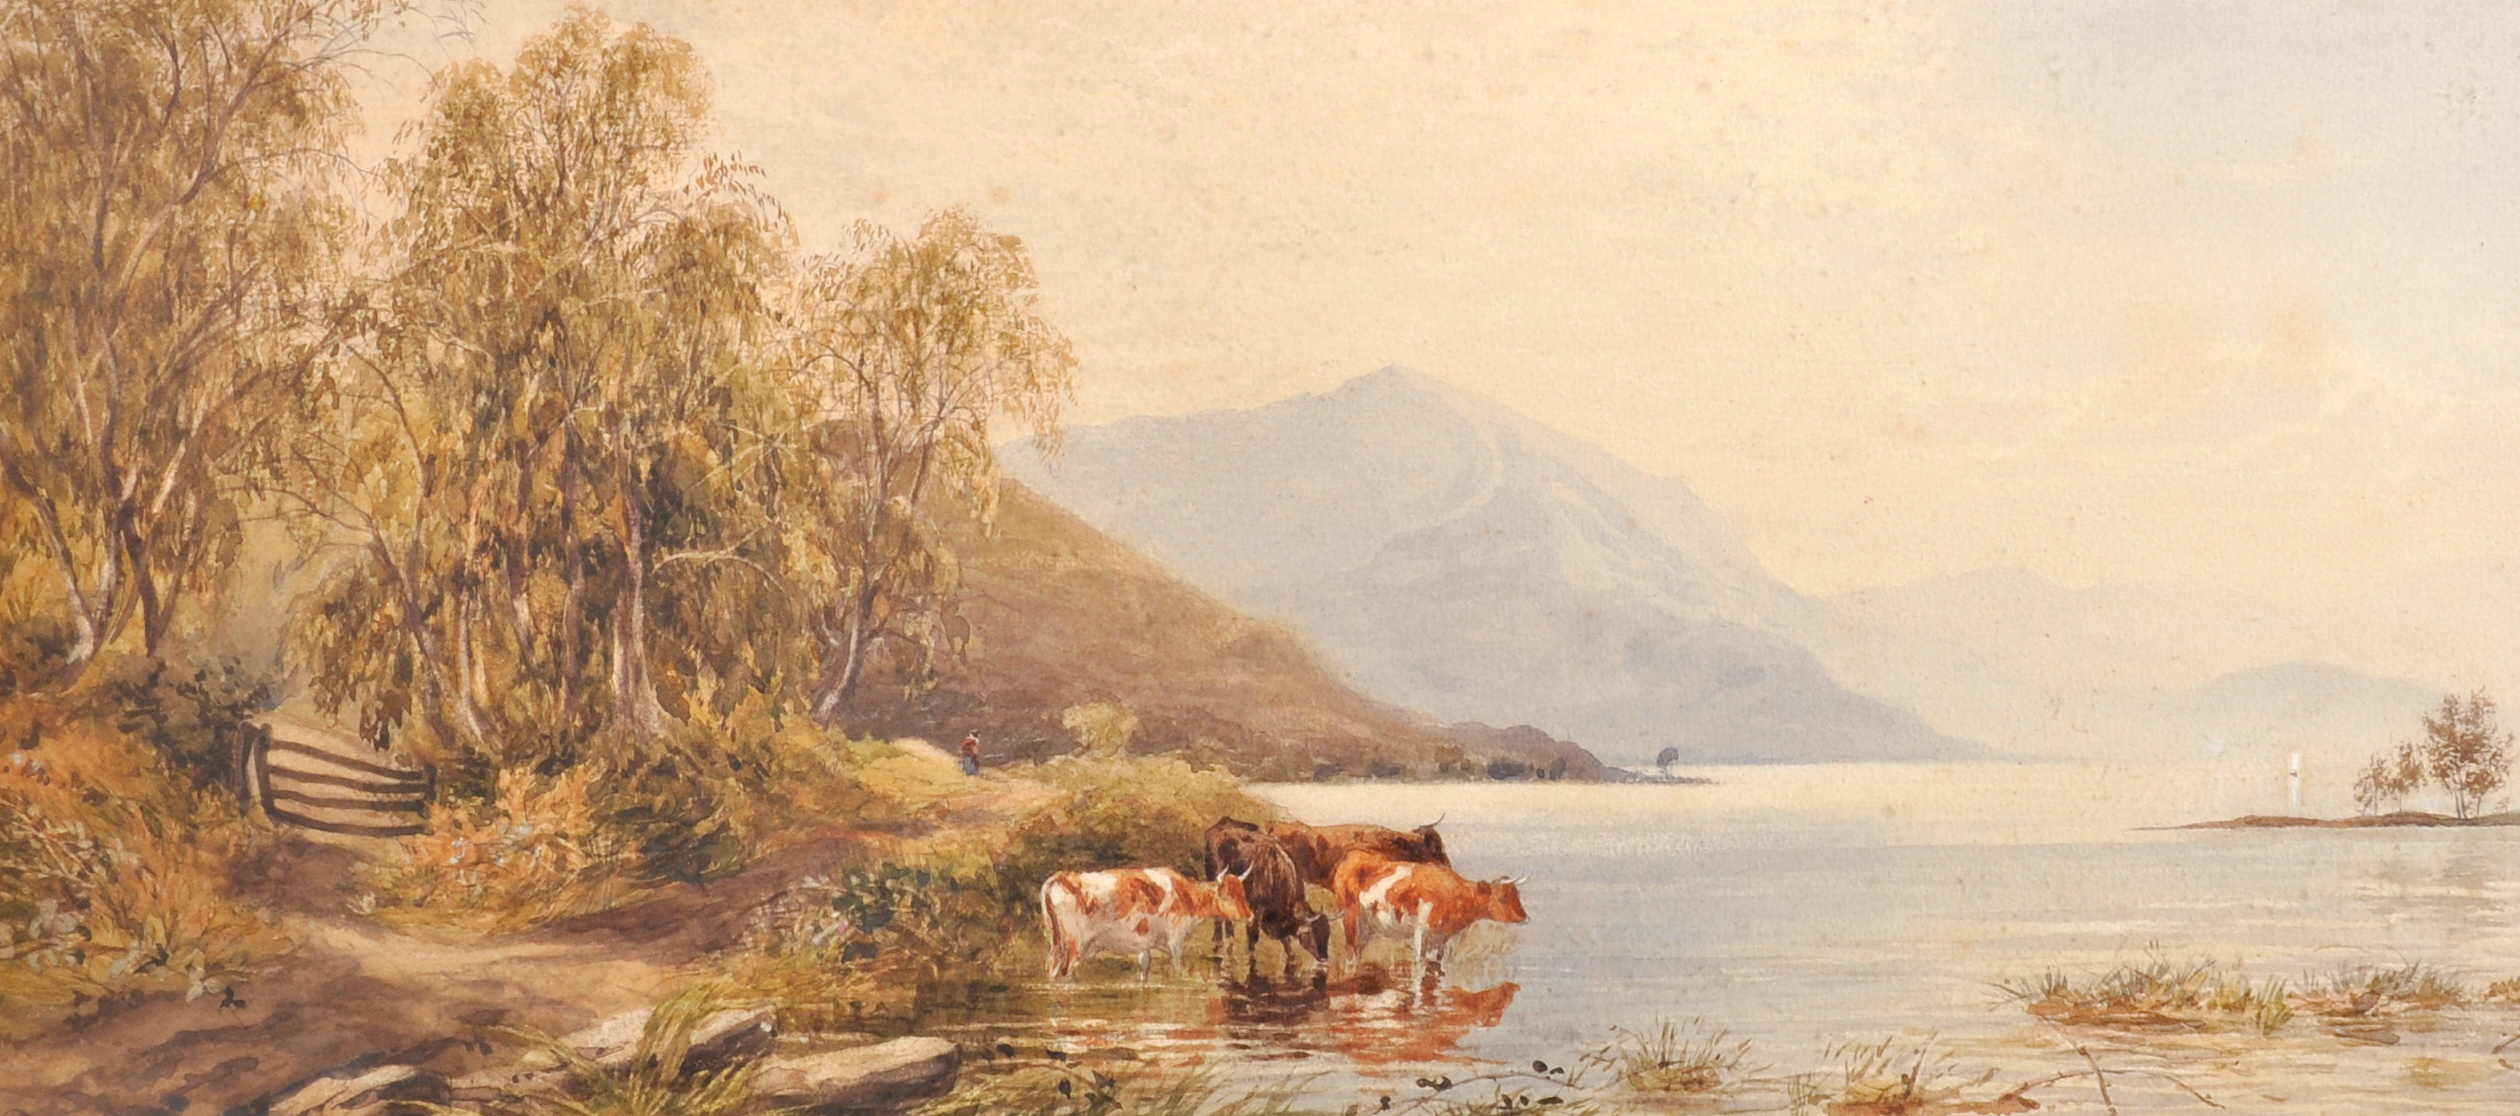 John Carlisle (act.1866-1916) British. Cows Watering in a Highland Landscape, Watercolour, Signed